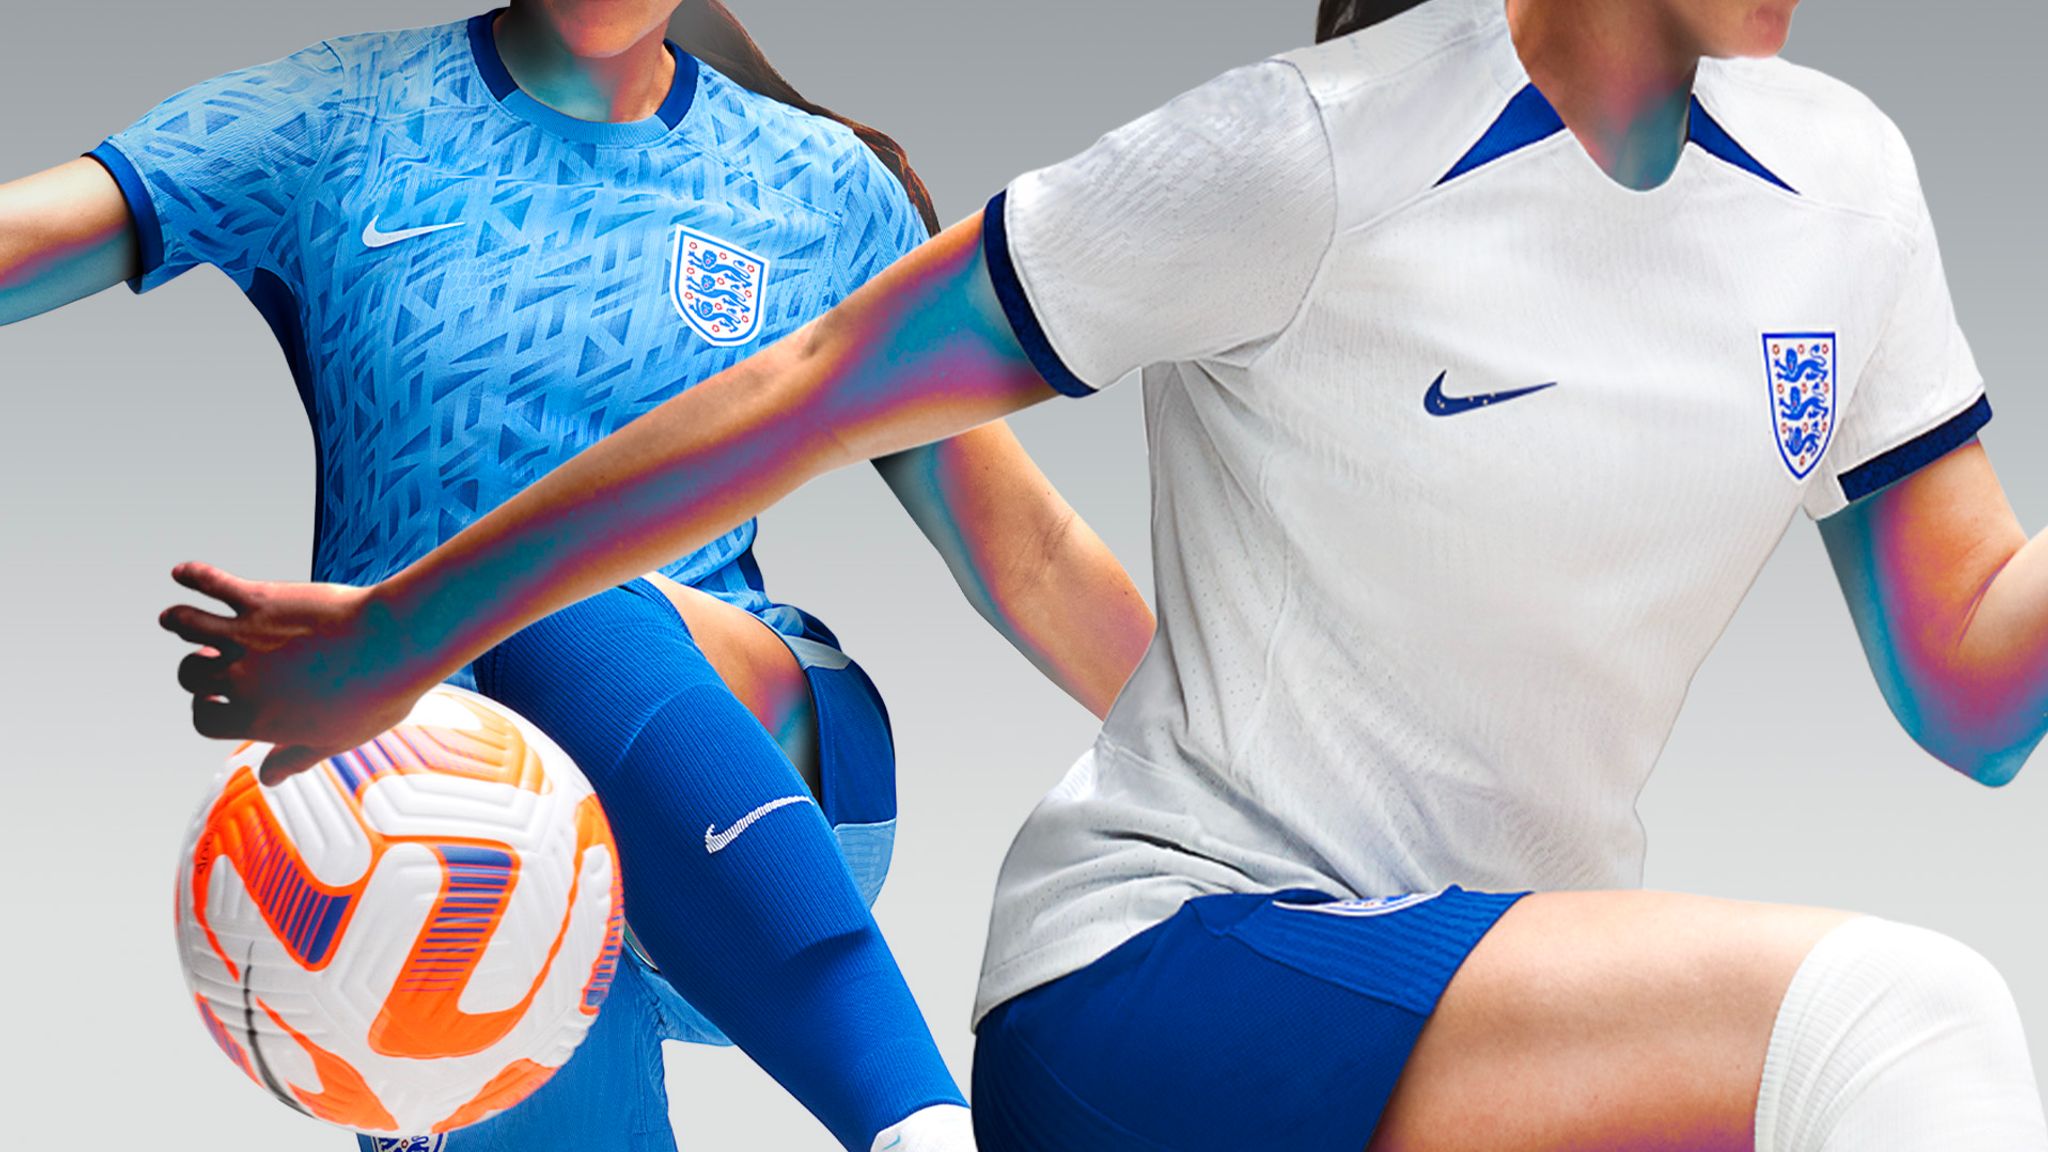 England Women's new kits switch to blue shorts from white shorts after  concerns over periods, Football News